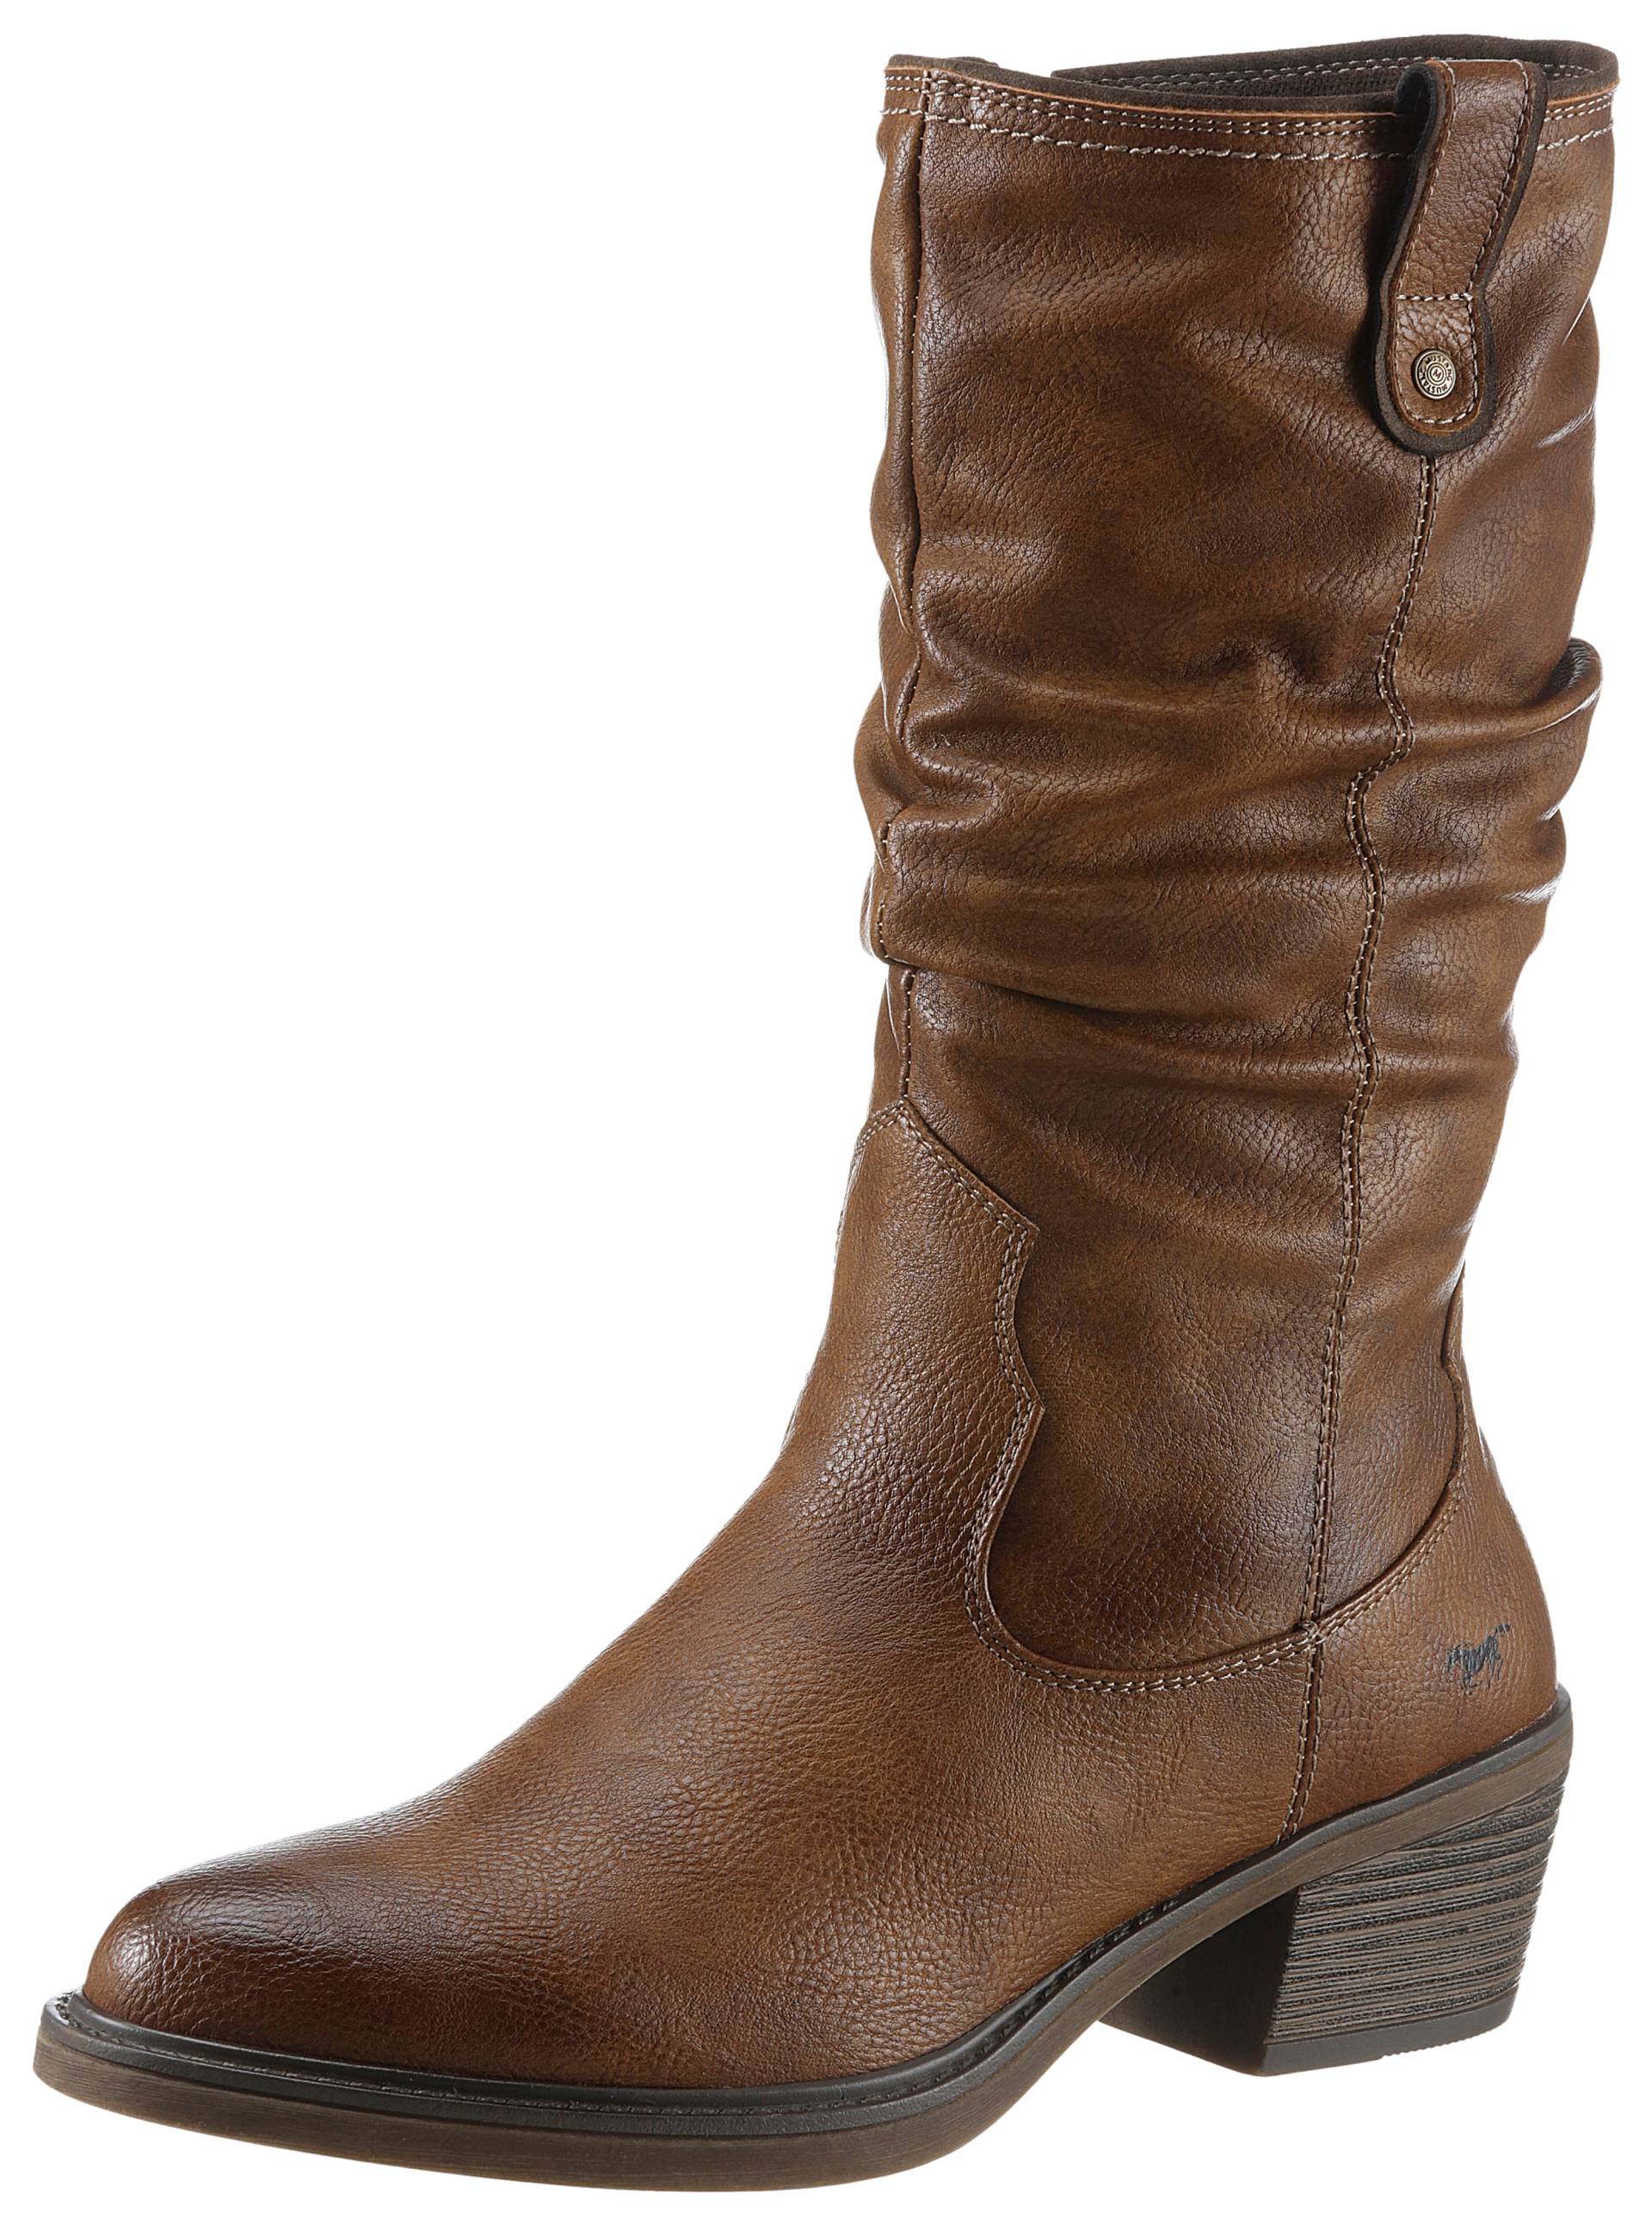 Mustang Shoes Cowboystiefel, mit gerafftem slouchy Schaft von mustang shoes